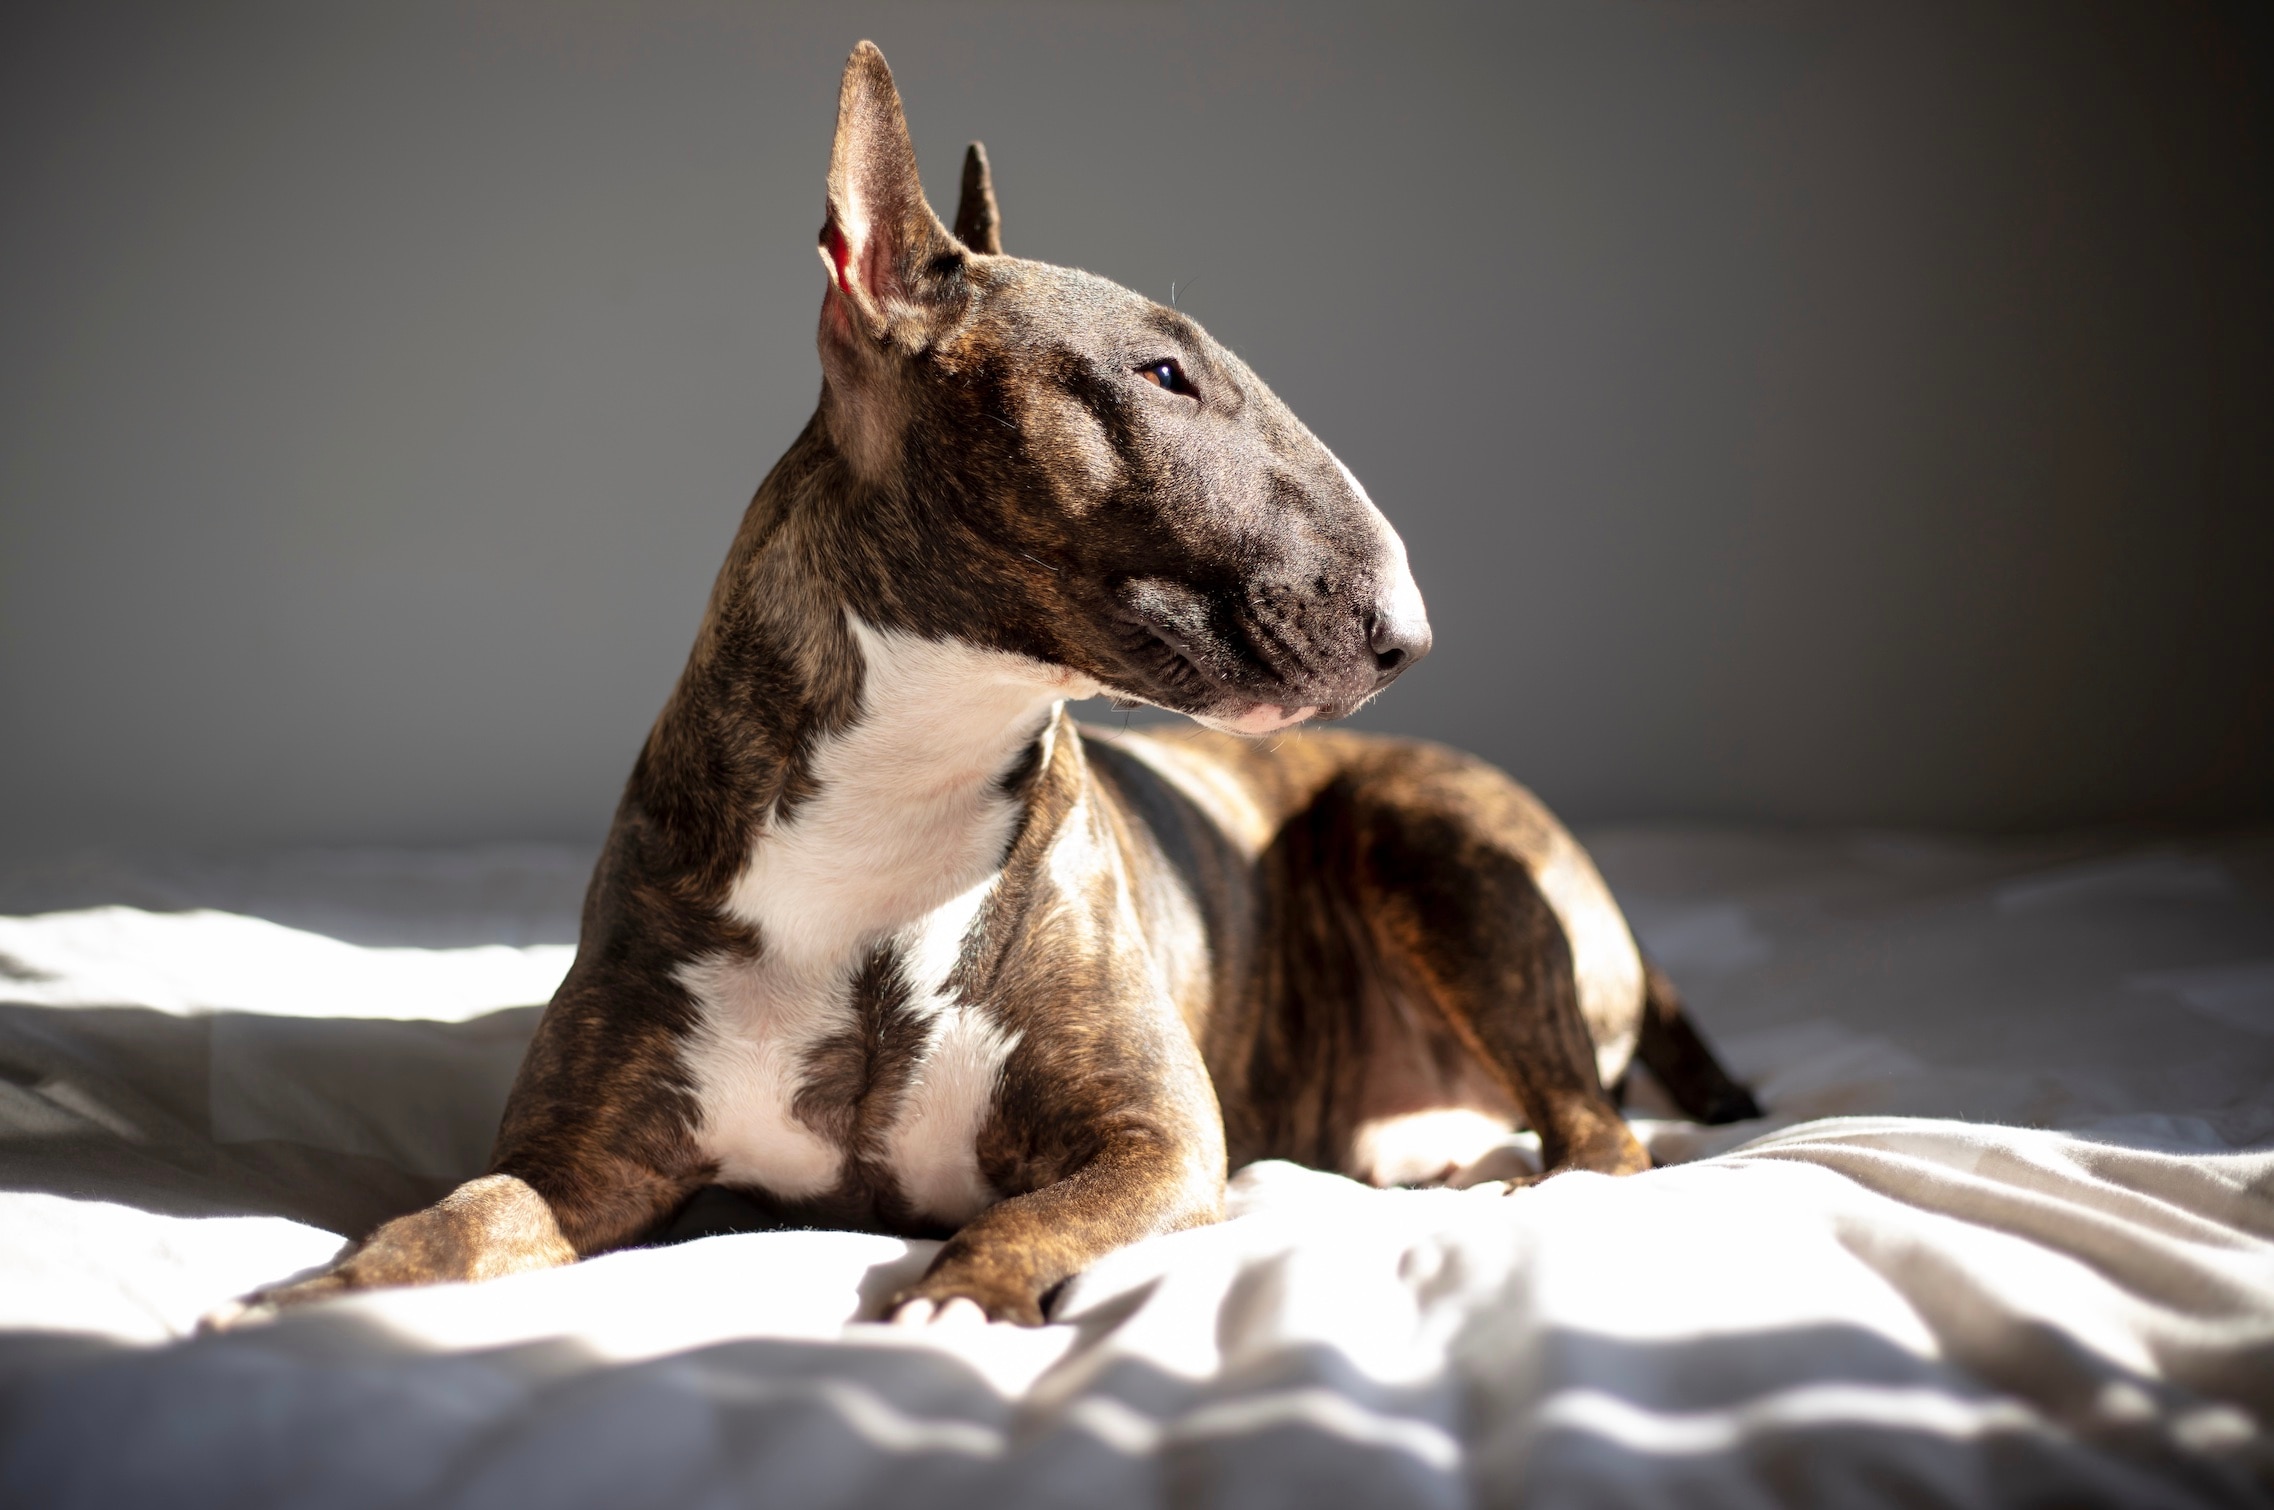 brindle bull terrier lying on a bed and looking to the side